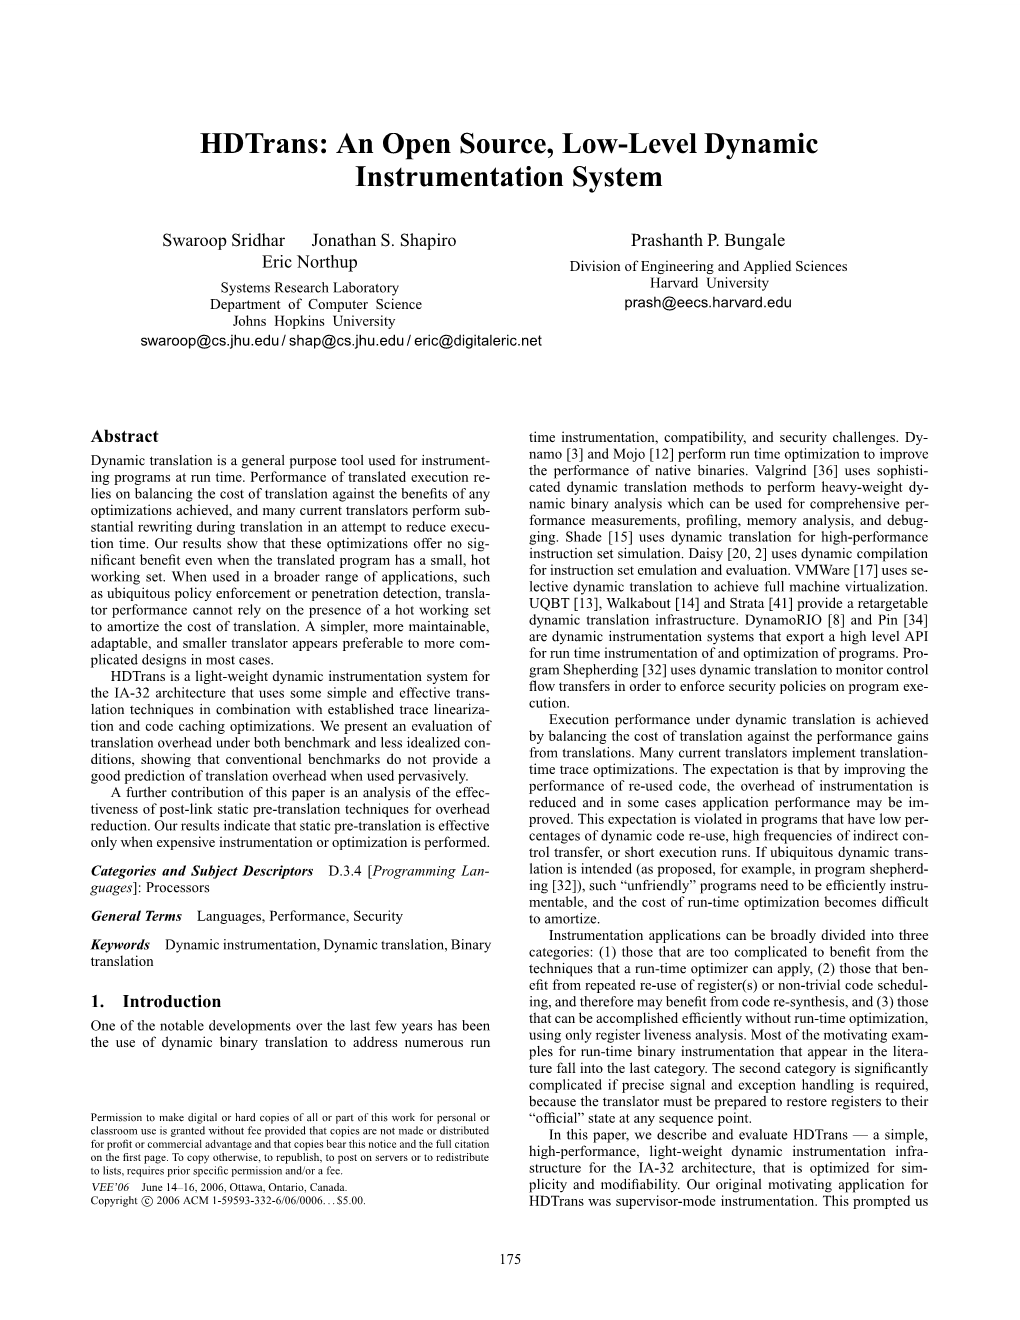 An Open Source, Low-Level Dynamic Instrumentation System